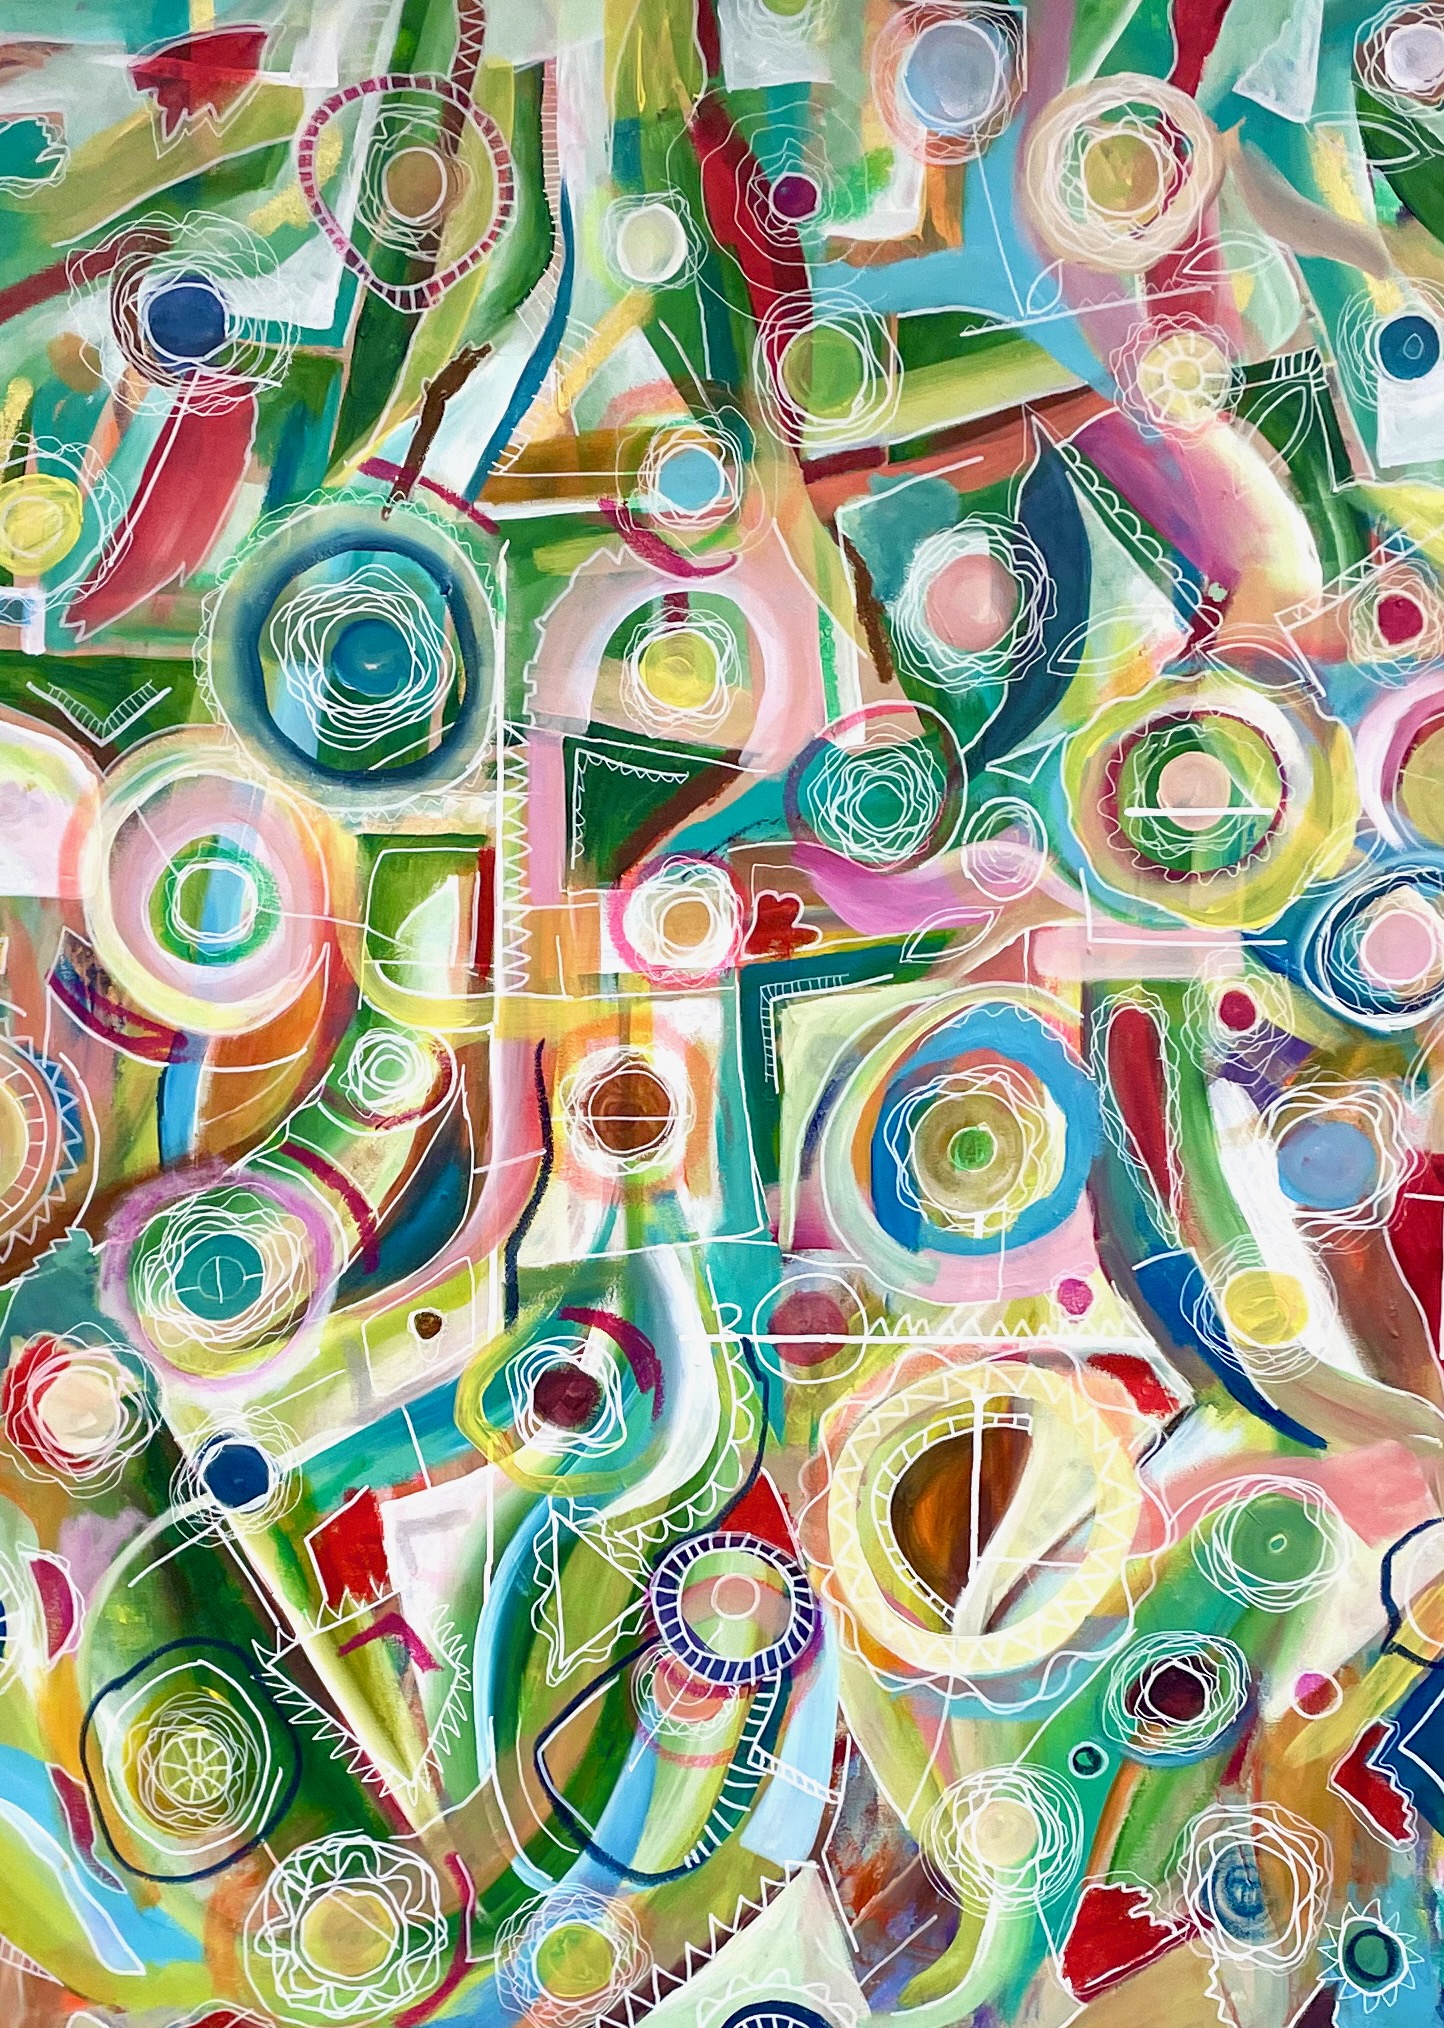 An abstract painting with numerous circles within circles and angular shapes with graphic white lines on top. There are numerous colors, primarily in pastel colors of pin, yellow, green, and blue. There are also a few dark green and red undertones. 